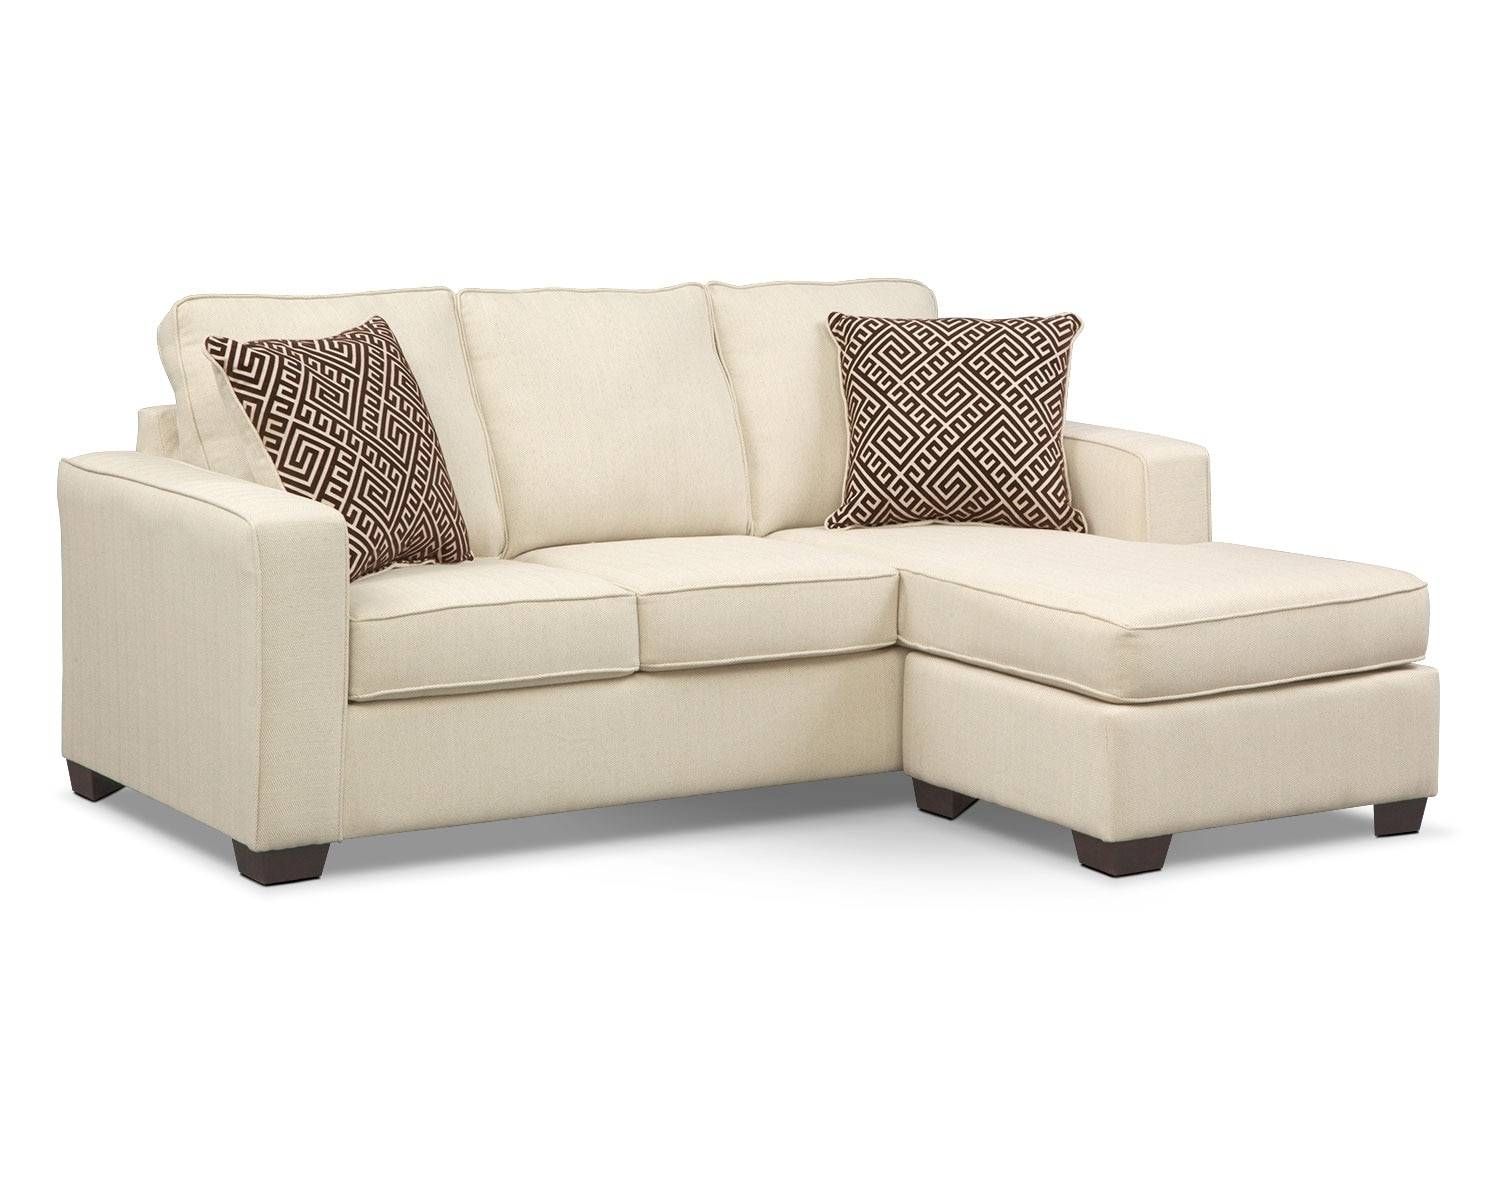 The Sterling Beige Sleeper Sofa Collection | Value City Furniture Inside Value City Sofas (View 22 of 25)